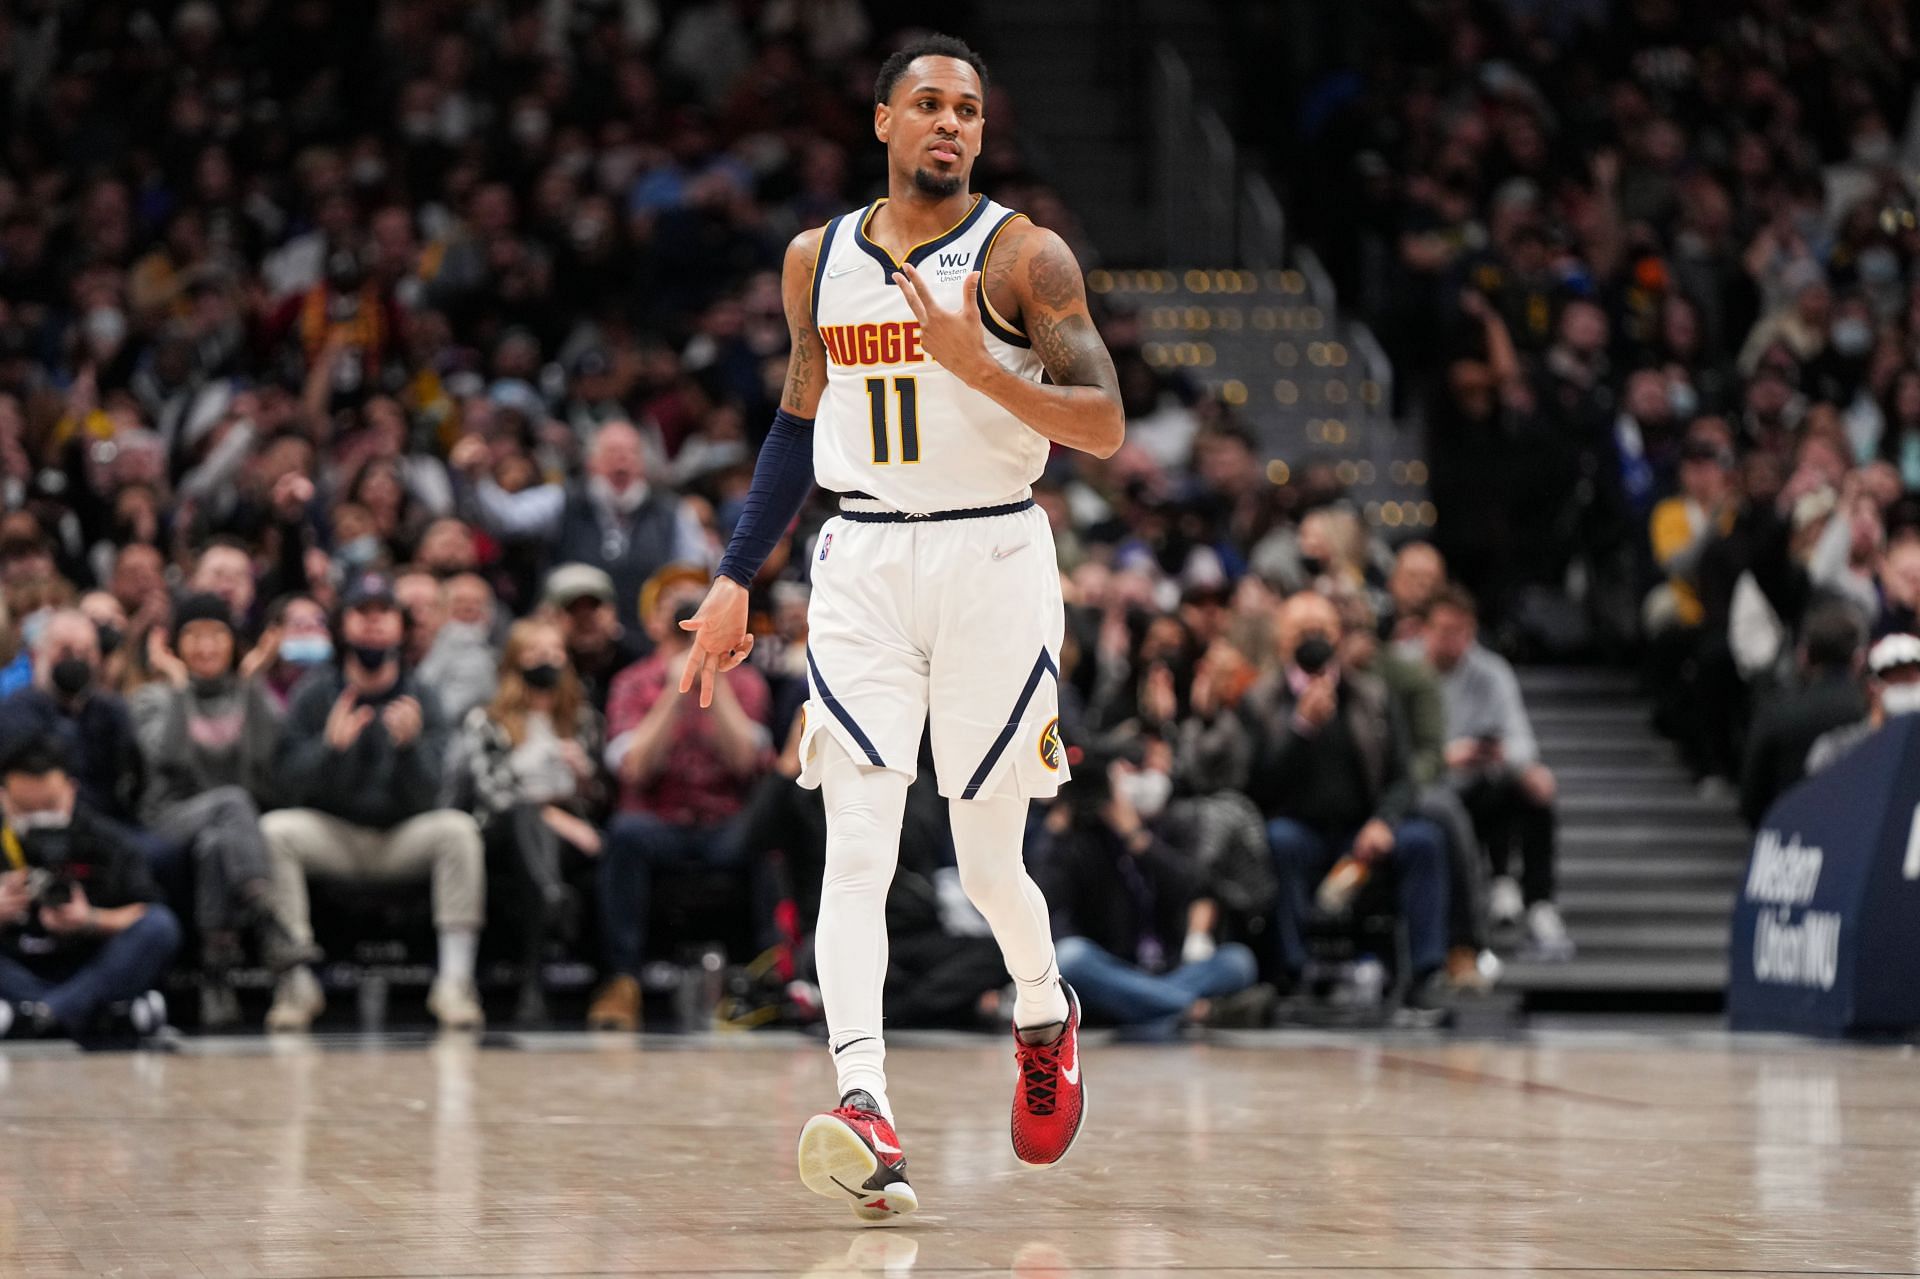 Monte Morris hit the game-winning three to give the Nuggets their second win over the Warriors.